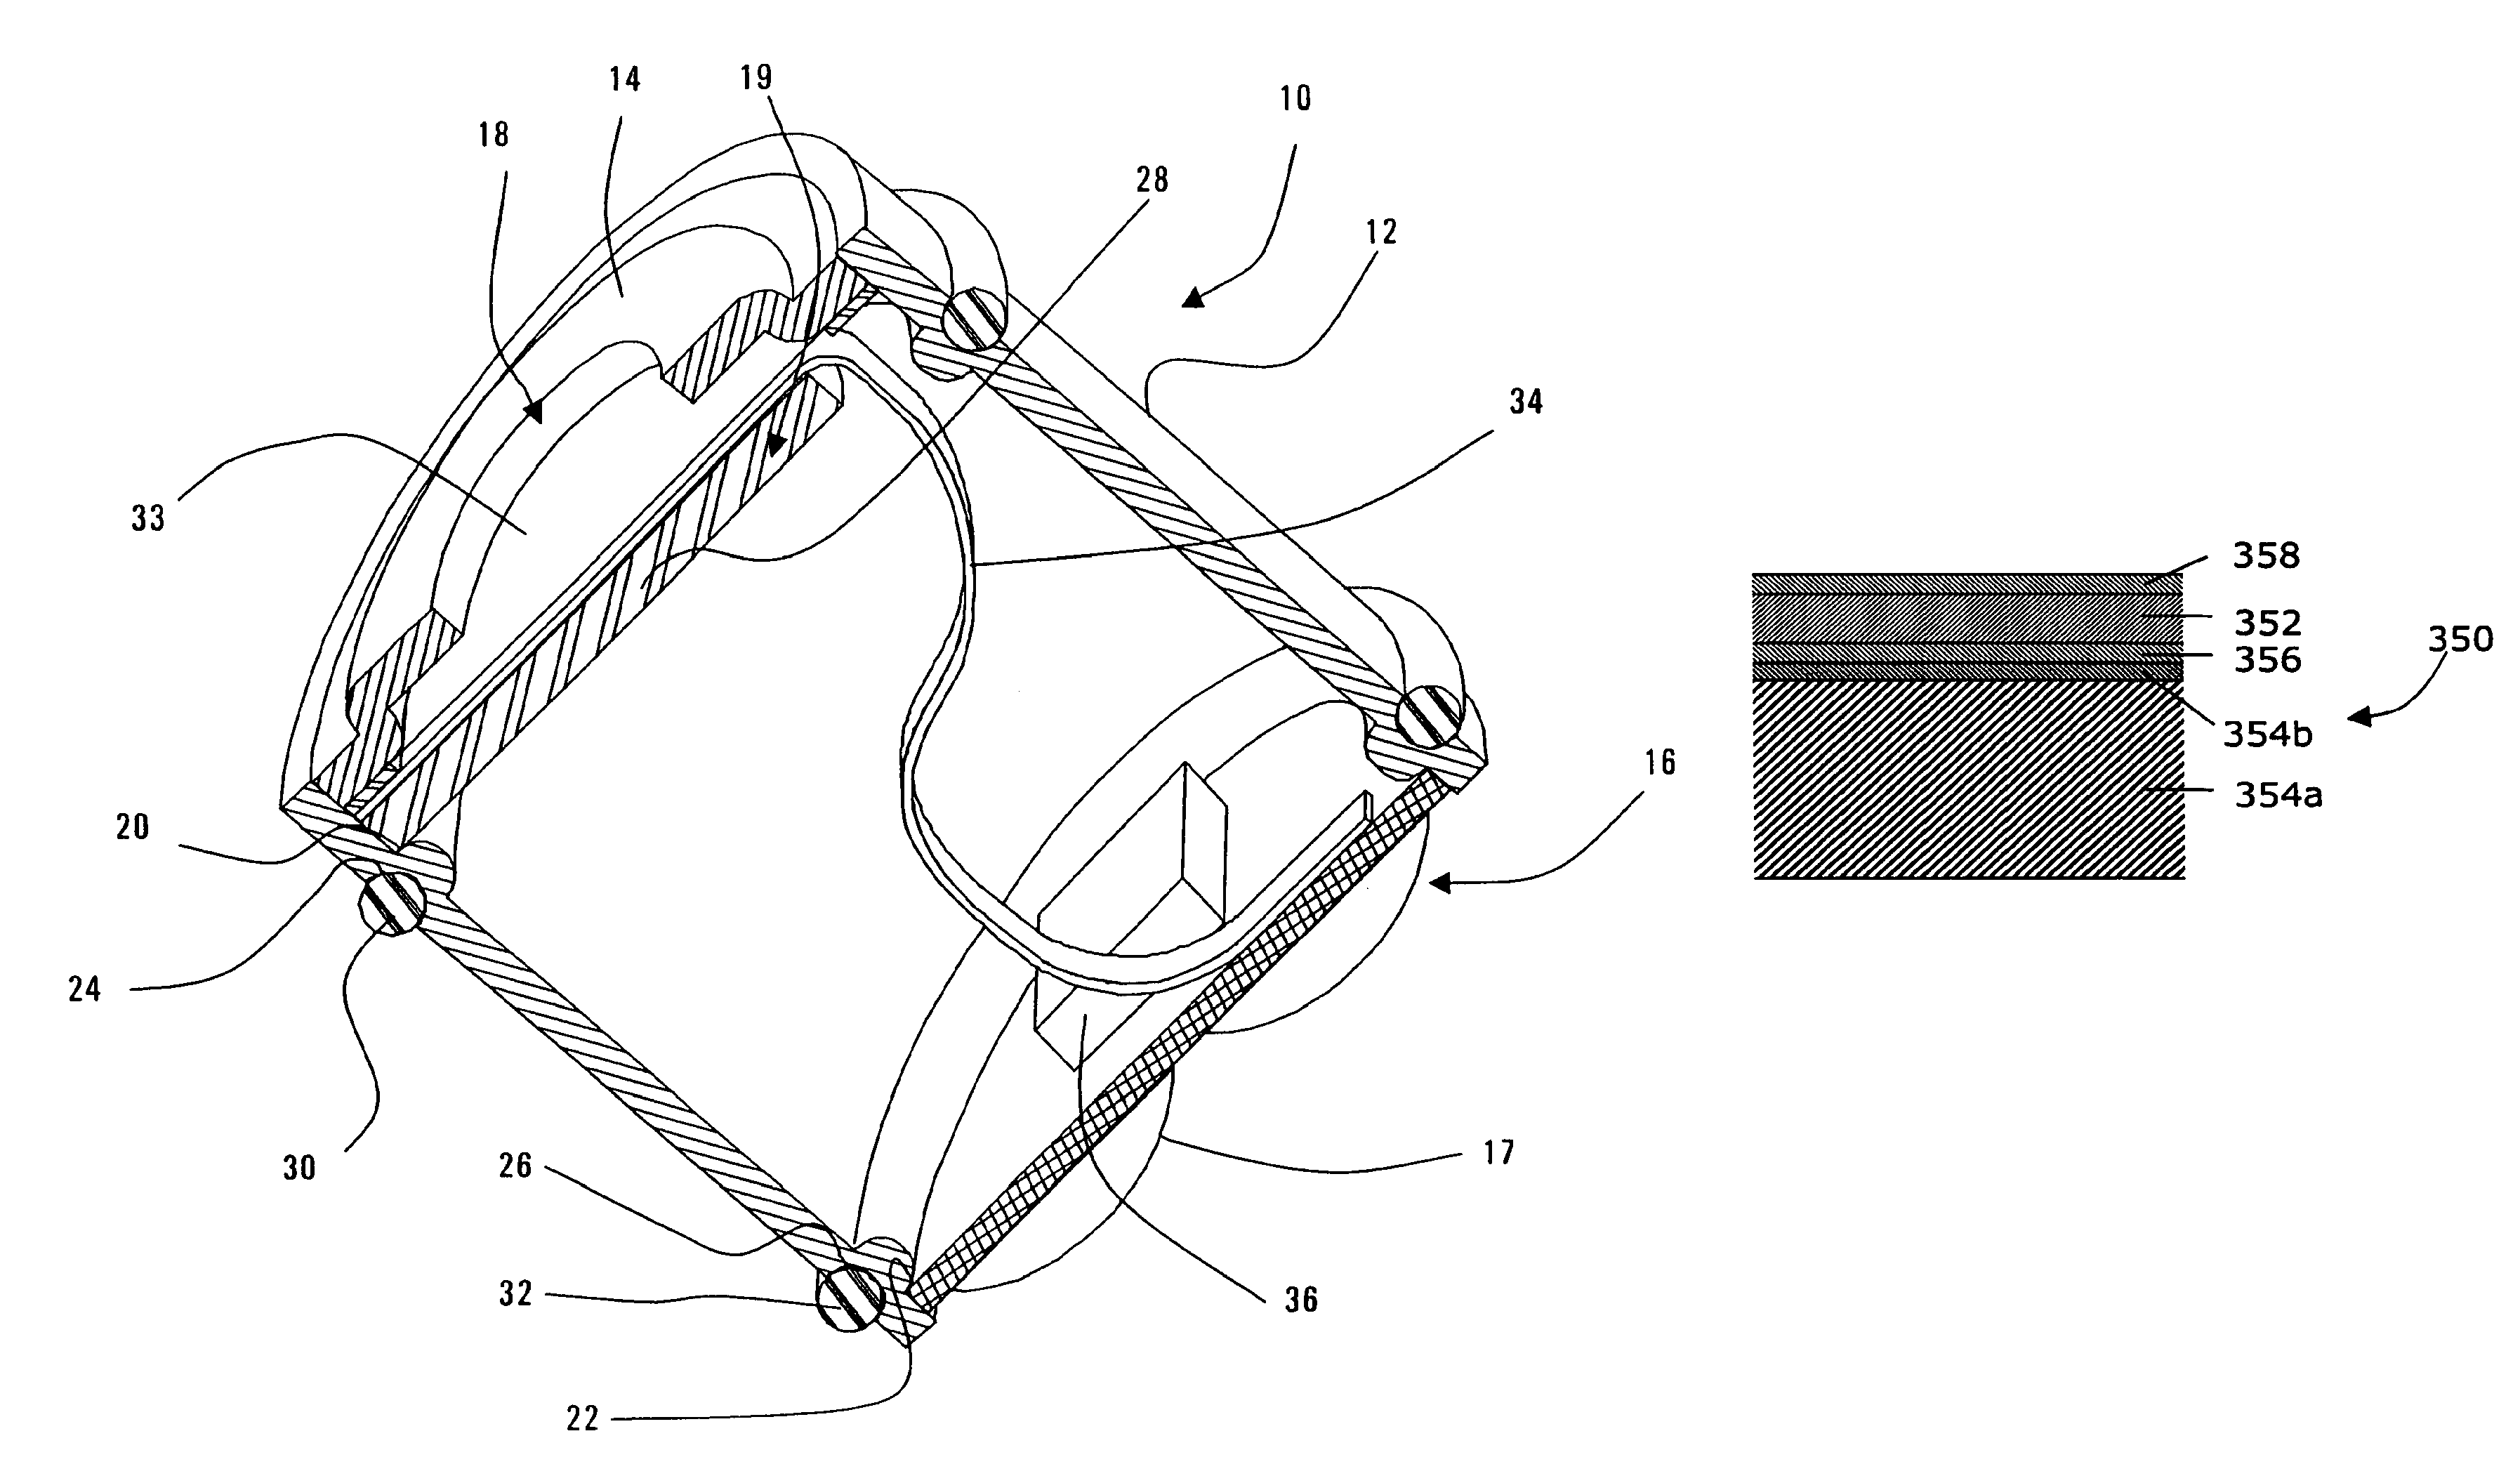 Electret assembly for a microphone having a backplate with improved charge stability